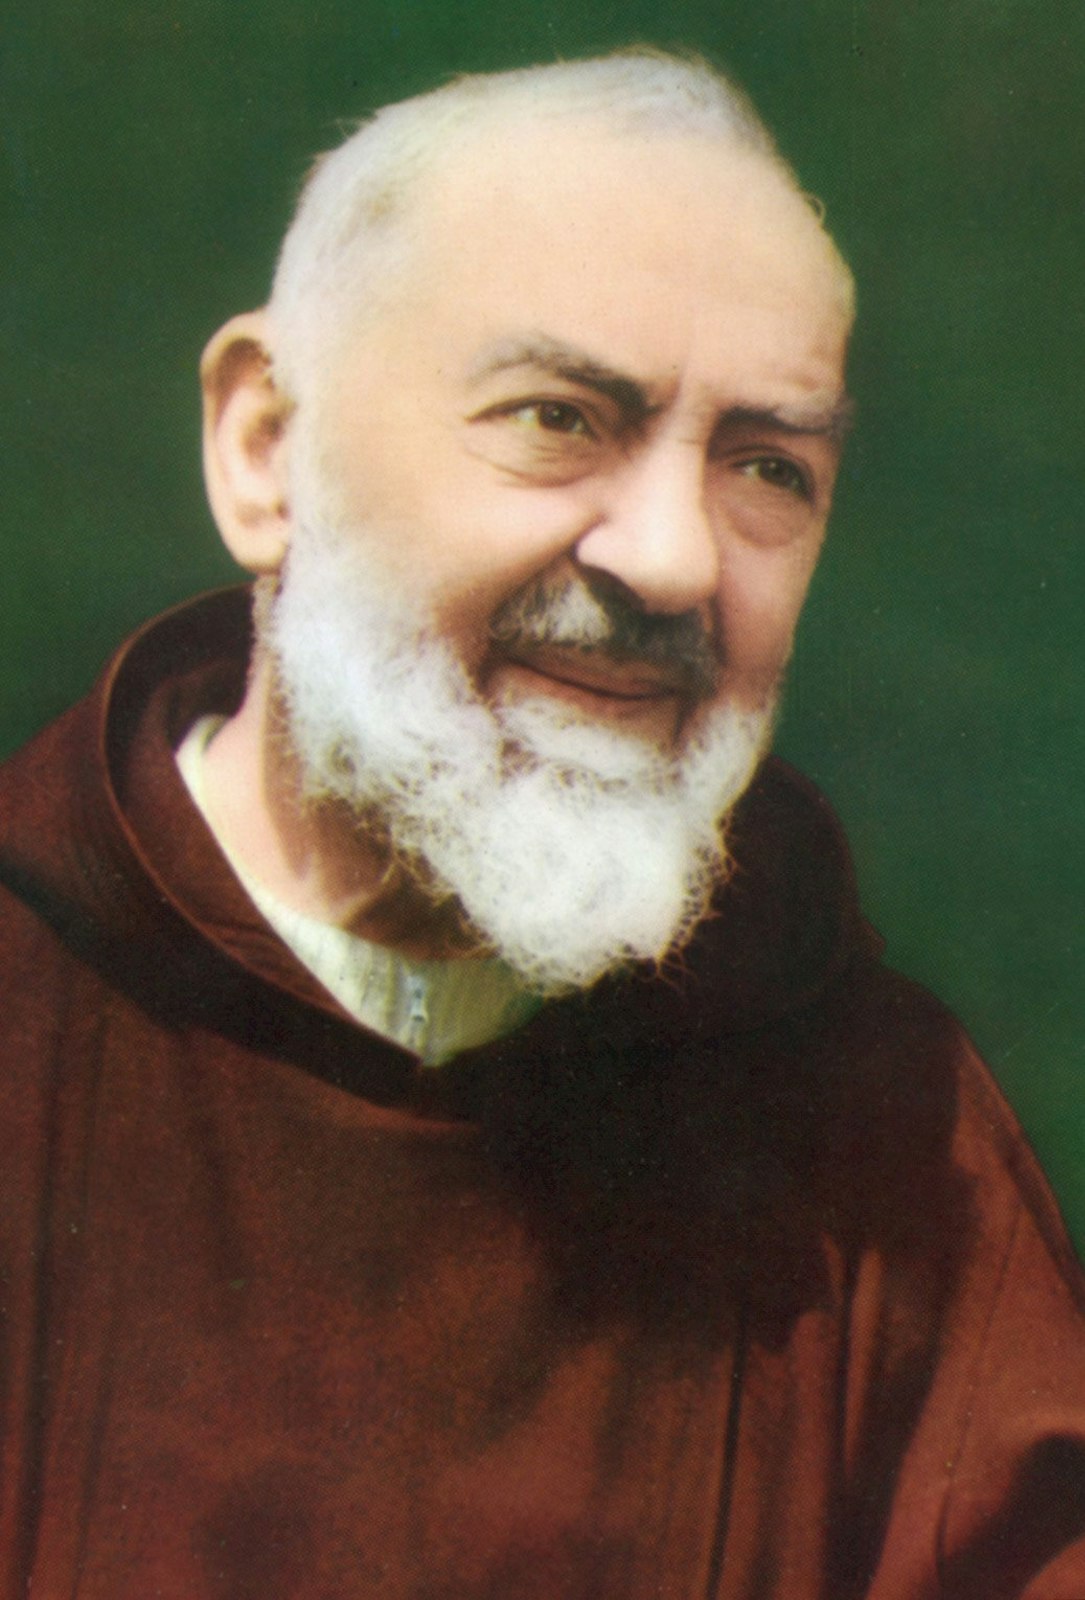 St. Padre Pio, a 20th century Capuchin saint who lived in Italy, was known throughout the world for his powerful prayers, causing thousands to seek him out. (CNS file photo)